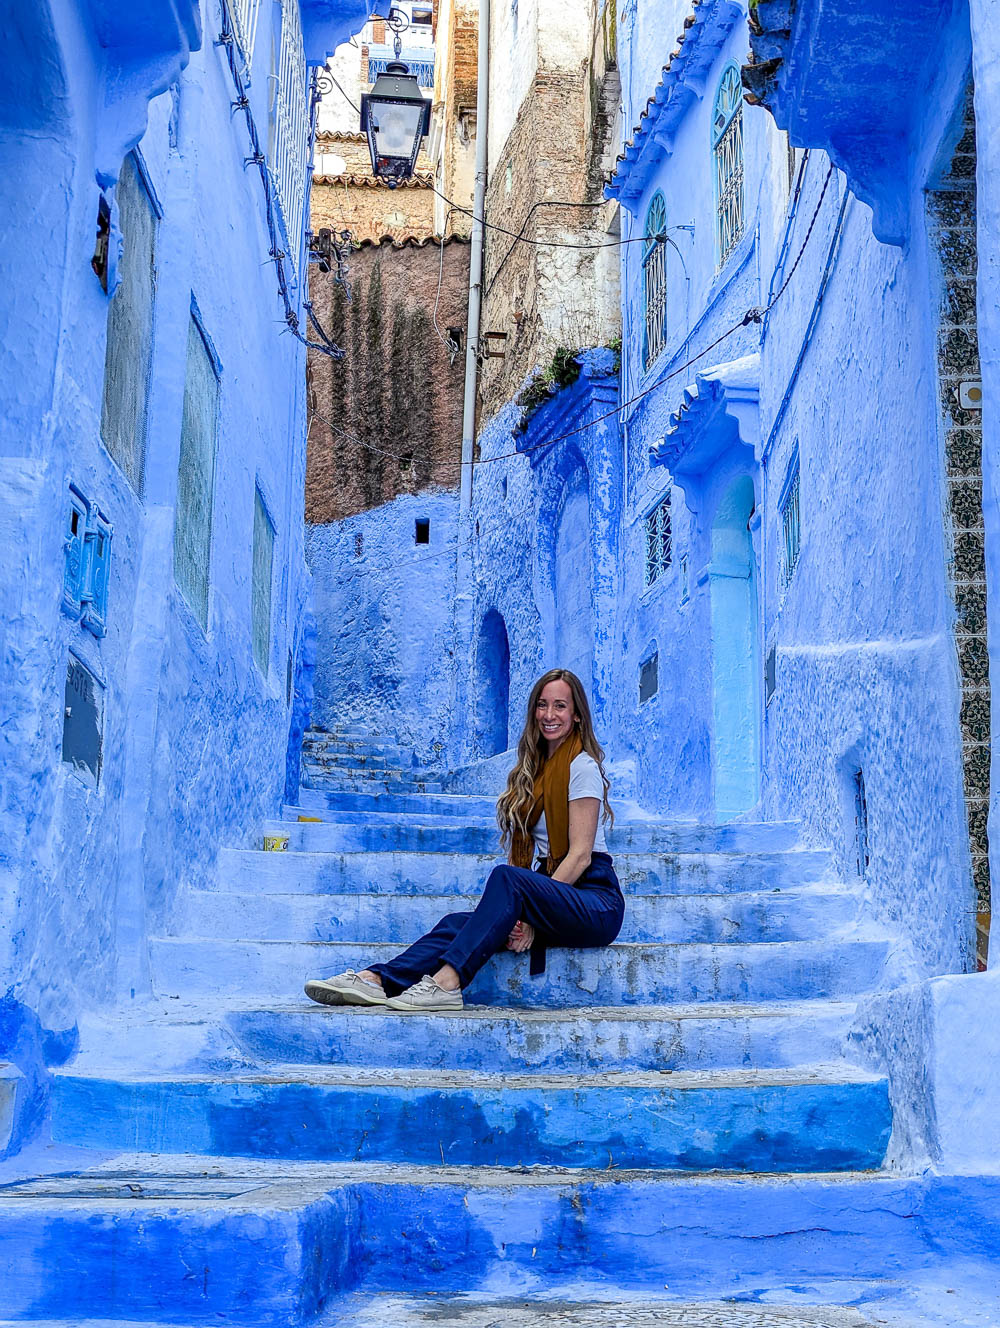 woman in blue pants sitting in an entirely blue alleyway and staircase